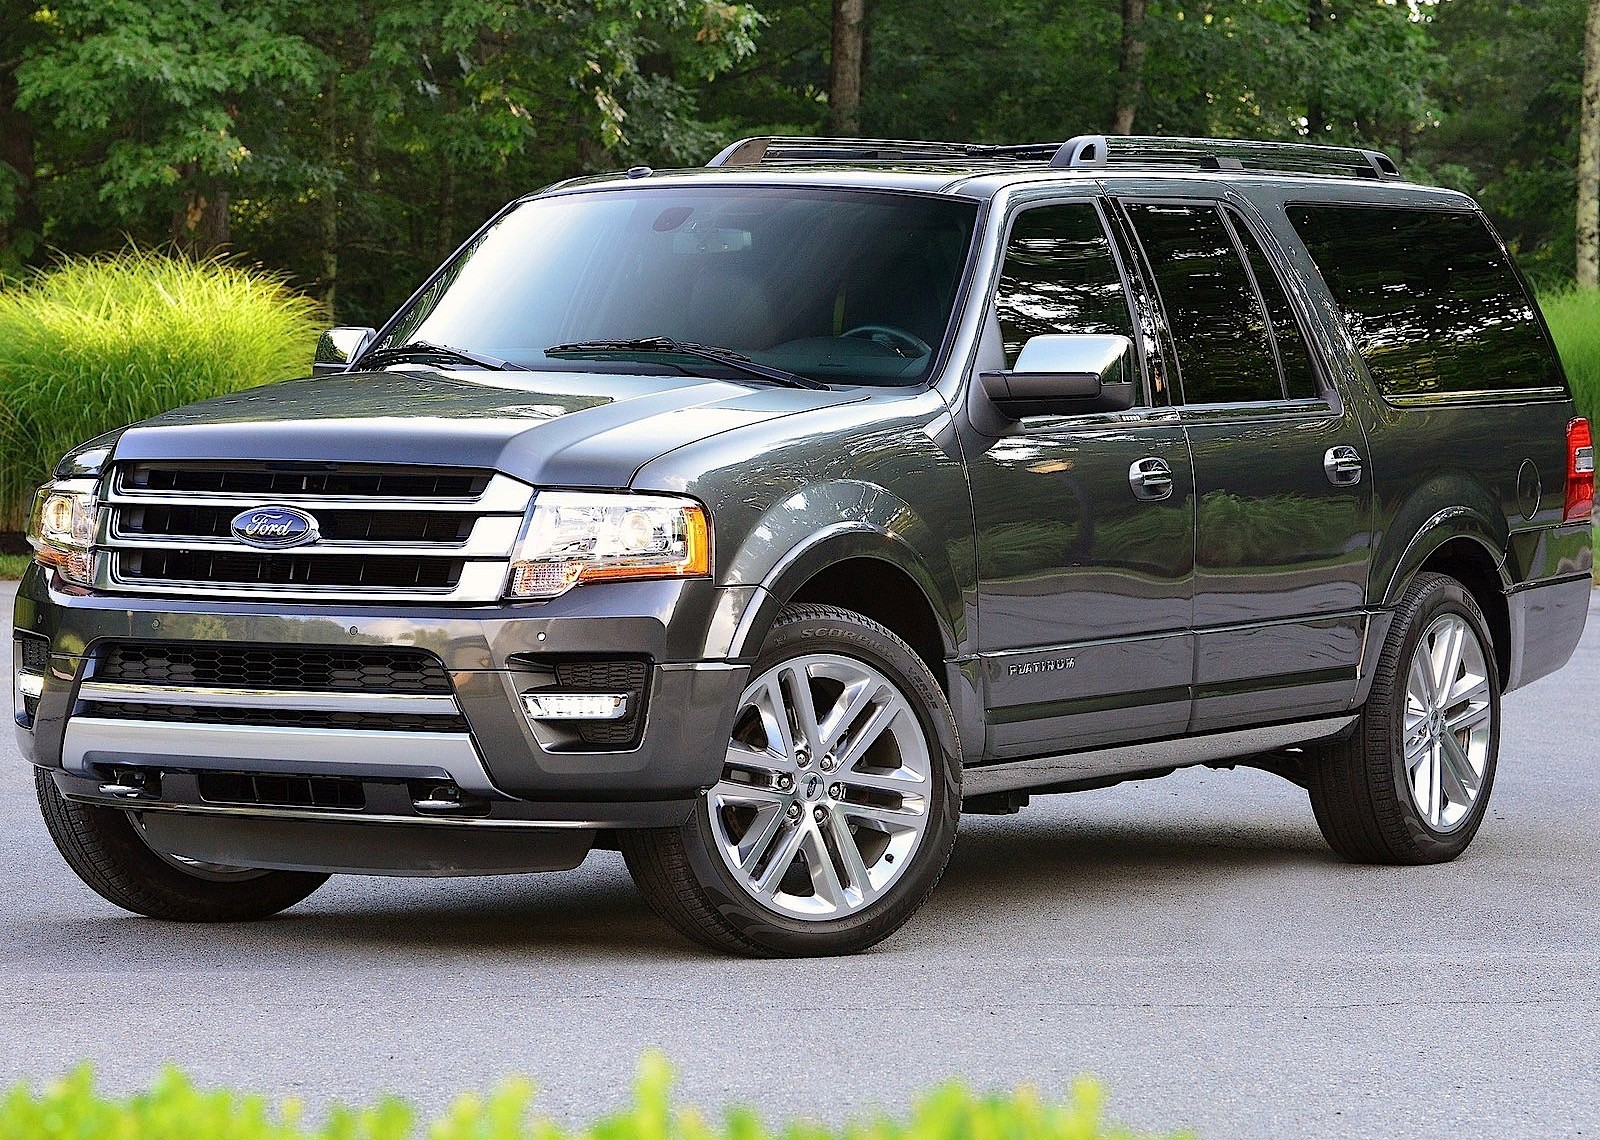 Ford expedition gross weight